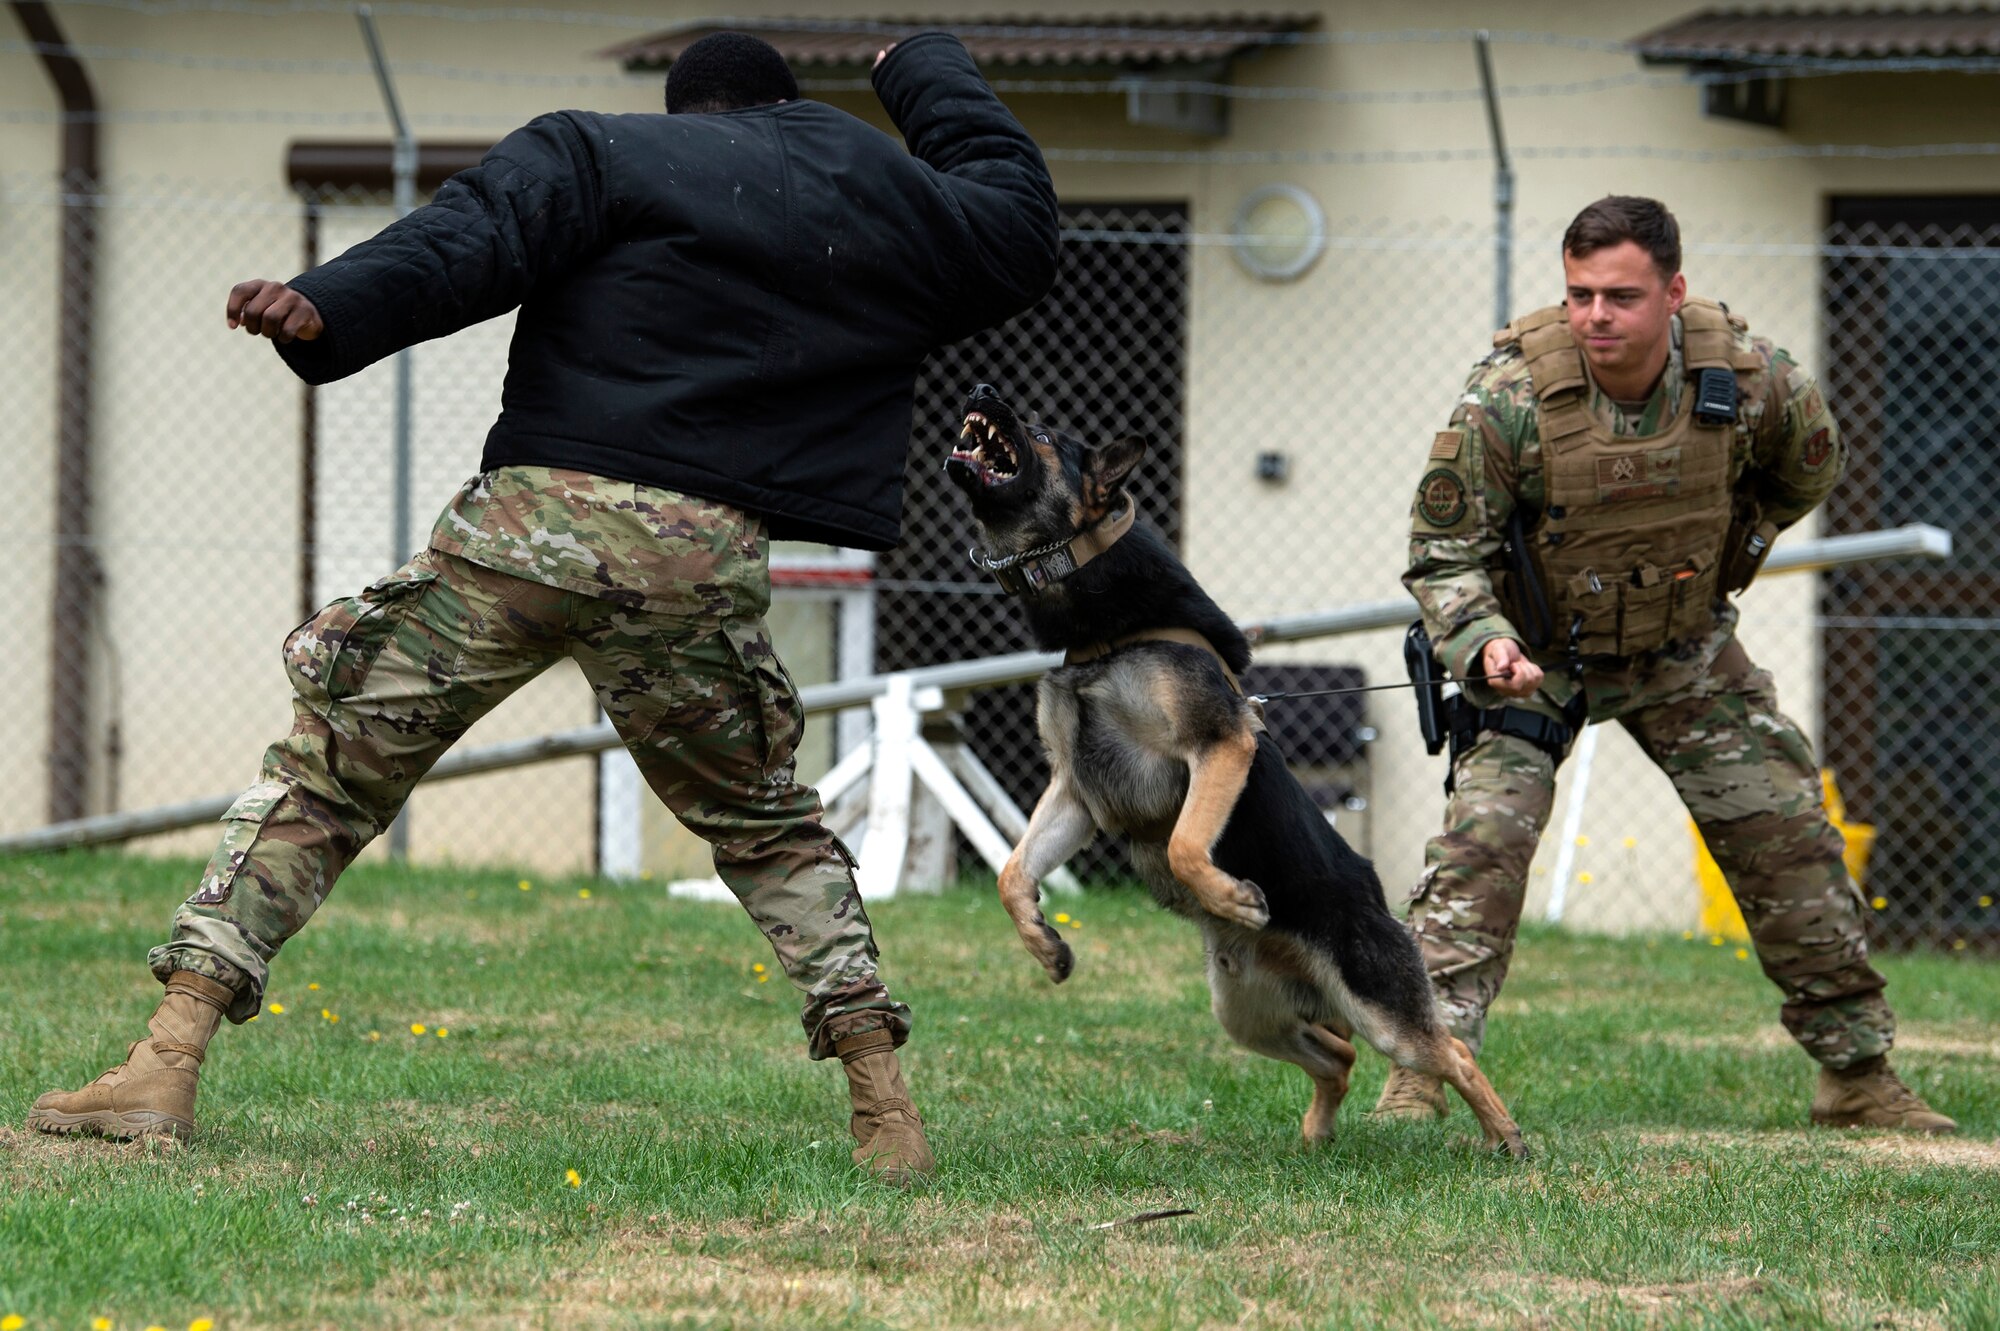 U.S. Air Force Senior Airman Victor Henderson, left, and Staff Sgt. Kyle Strobele, right, 52nd Security Forces Squadron military working dog handlers, conduct training with Mike, an MWD, at Spangdahlem Air Base, Germany, Aug. 1, 2019. Handlers wear protective gear to allow MWDs to practice correctly subduing a suspect with minimal injury to the handler. (U.S. Air Force photo by Airman 1st Class Valerie Seelye)